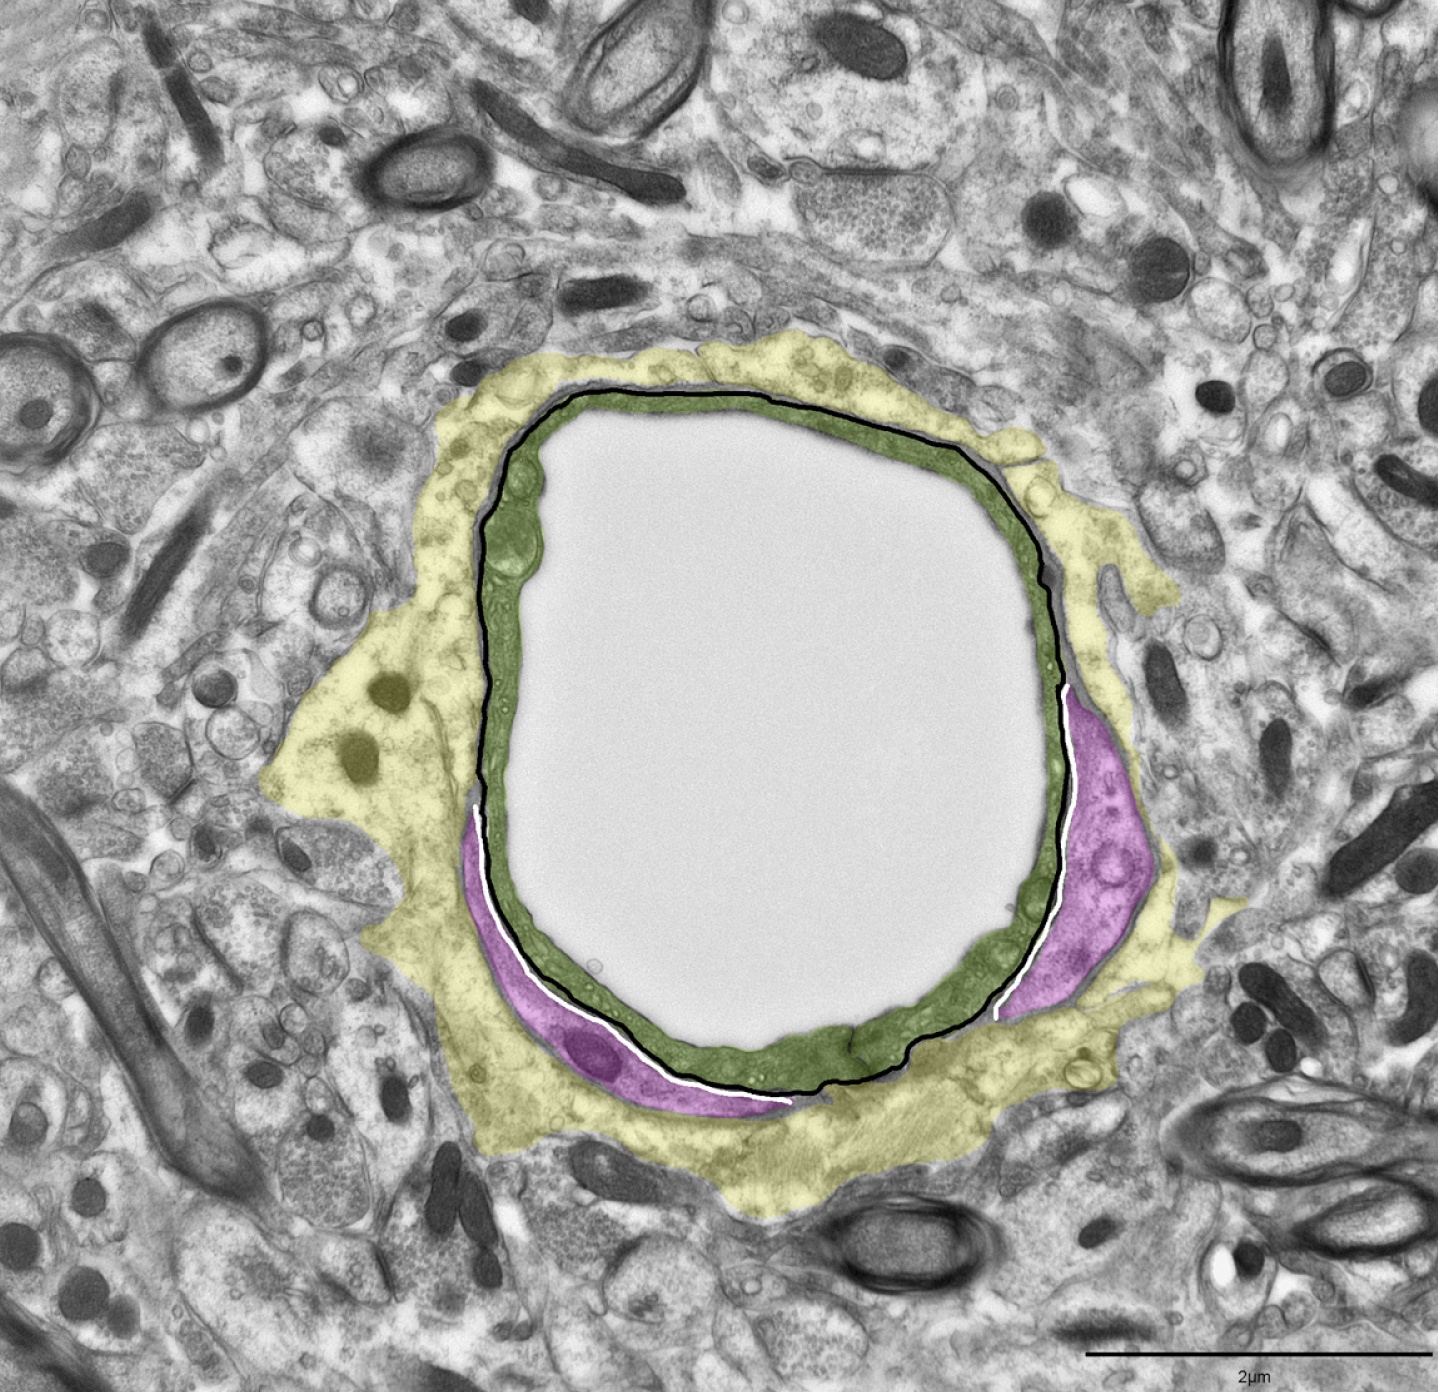 Procedure for quantification of pericyte coverage. Cross section of a capillary in cortex. Pericyte coverage was measured as the percentage of the endothelial cell perimeter covered by pericytes. The black line outlines the endothelial cell perimeter, and the white lines indicate endothelial cell membrane domains covered by a pericyte. Green overlay shows the endothelium and magenta identify pericytes while yellow outlines the astrocyte endfeet. Scale bar 2μm.